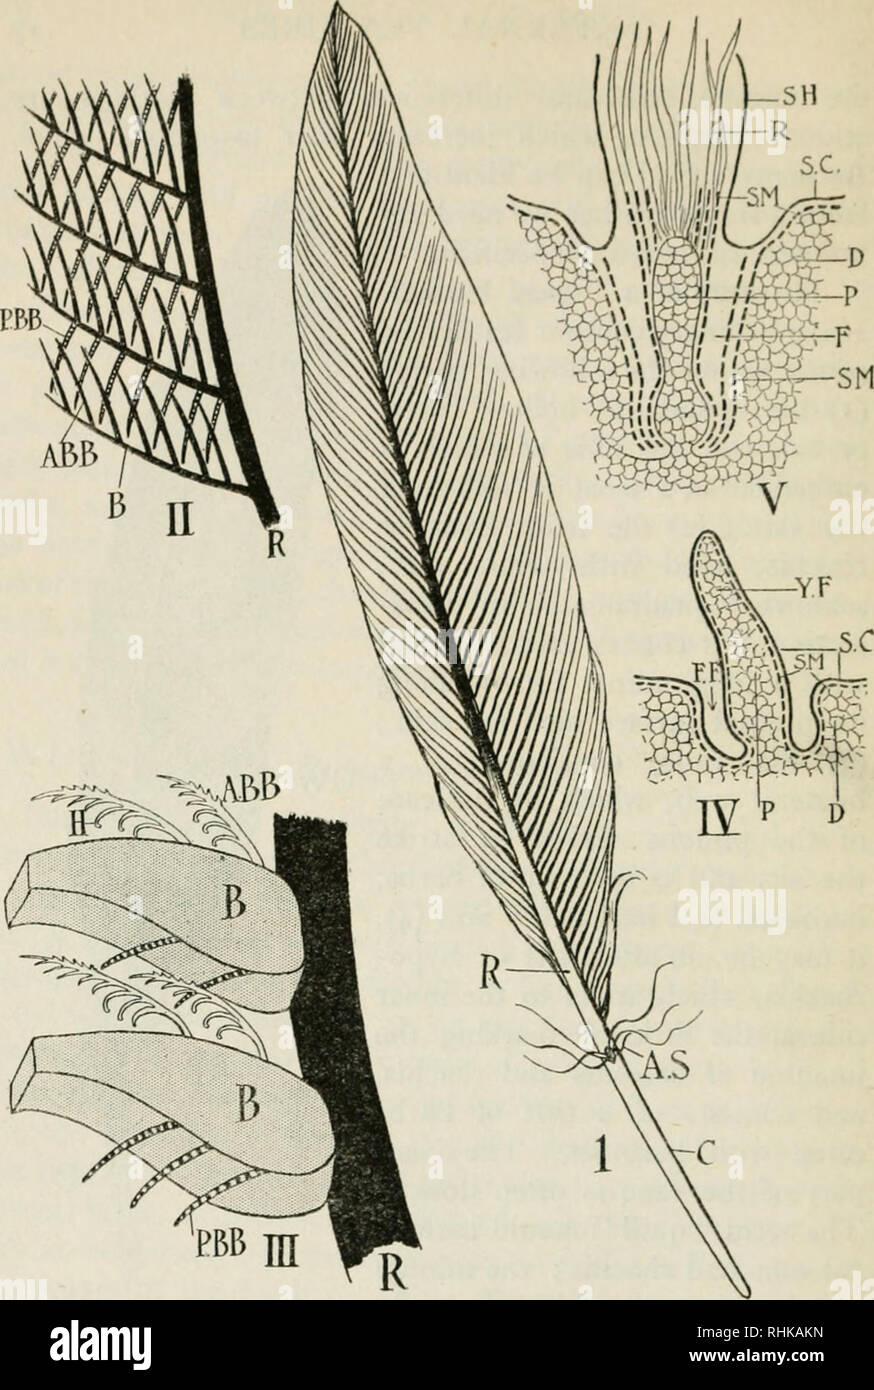 . The biology of birds. Birds. Fig. 2.'—Structure and Development of the Feather (diagrammatic). I. An ordinary pinion; c, calamus or quill; A.S., aftershaft; u., rhachis. II. An enlarged part of the vane; R.,rhachis; B.,barb; a.b.b., an anterior barbule; P.B.B., a posterior barbuie. III. Two barbs (b) enlarged; A,B.B., an anterior barbuie; h., book- lets ; P.B.B., a posterior barbuie. IV^. An incipient stage in the de- velopment of a feather; y.f., young feather; p., the internal pulp or dennis; r.F., the feather folUcle; D., the dermis ; s.c, stratum corneum of the epidermis, which forms a s Stock Photo